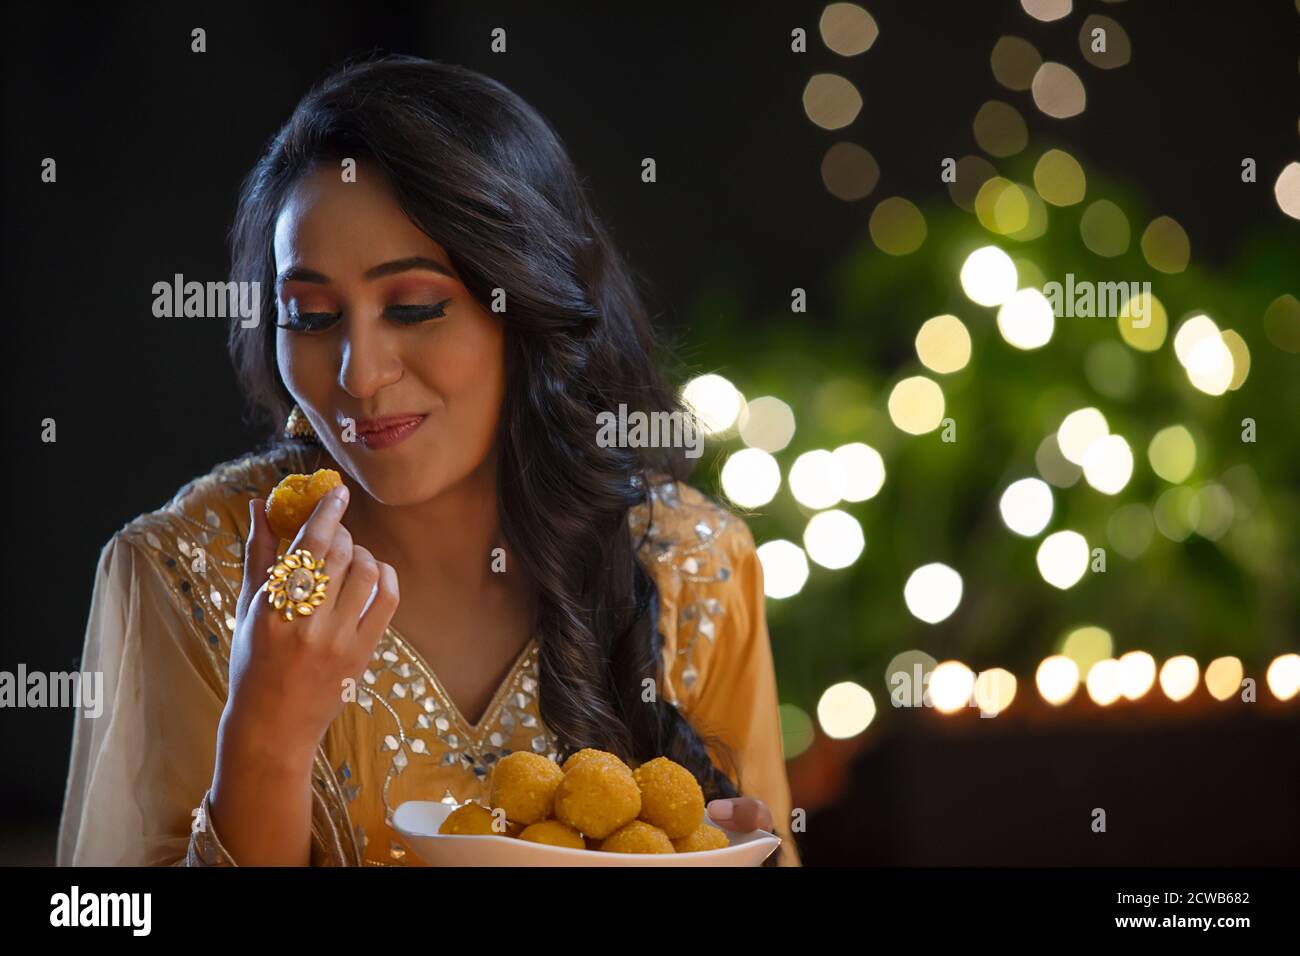 Woman looking at a ladoo after taking a bite Stock Photo